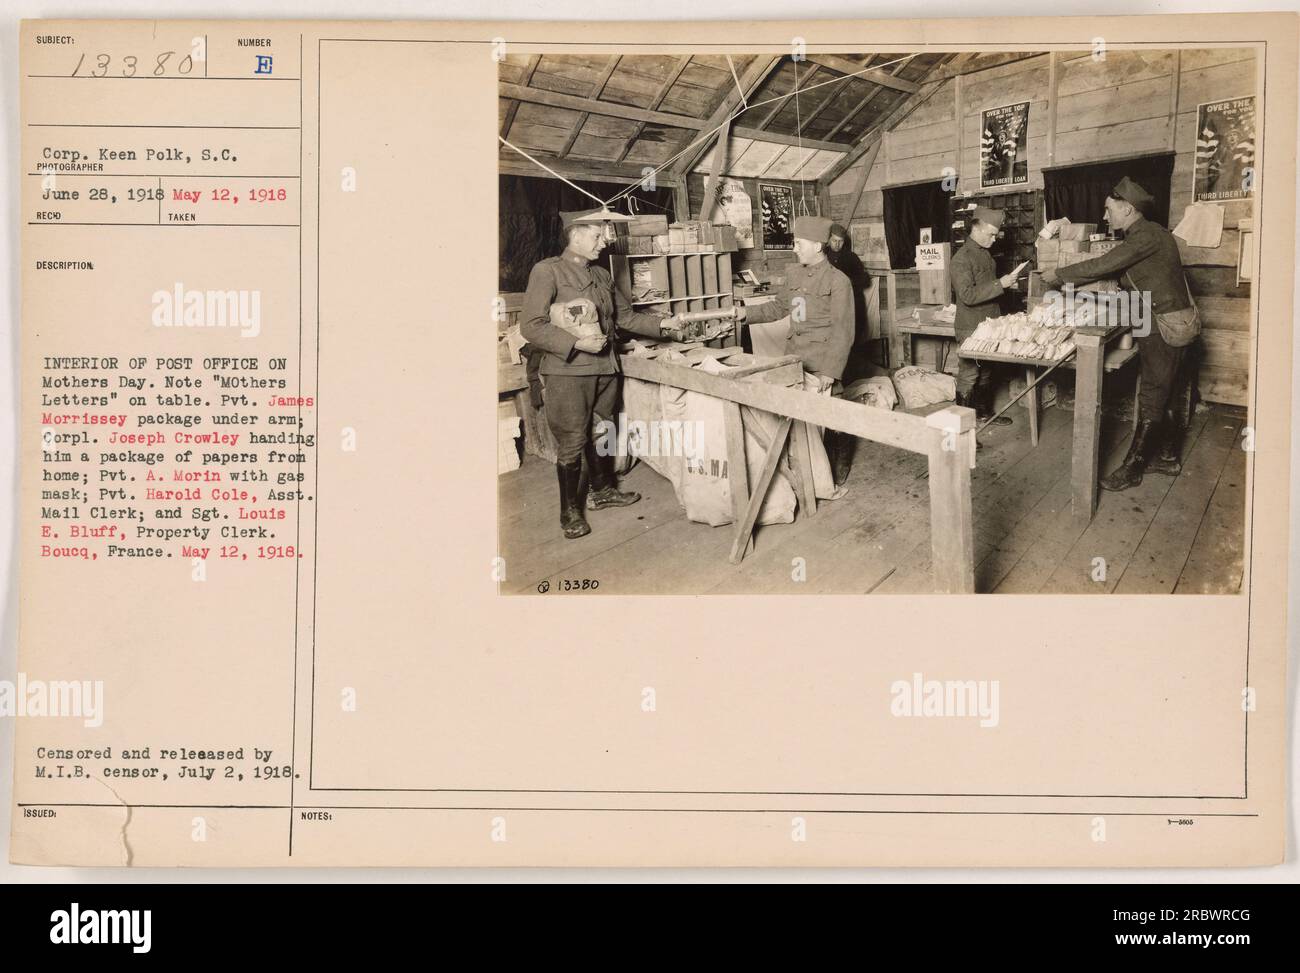 Interior of a post office in Boucq, France, on Mother's Day during World War One. Pvt. James Morrissey holds a package under his arm while Corp. Joseph Crowley hands him a package of papers from home. Pvt. A. Morin is seen with a gas mask, Pvt. Harold Cole is the assistant mail clerk, and Sgt. Louis B. Bluff is the property clerk. Censored and released by M.I.B. censor on July 2, 1918. Stock Photo